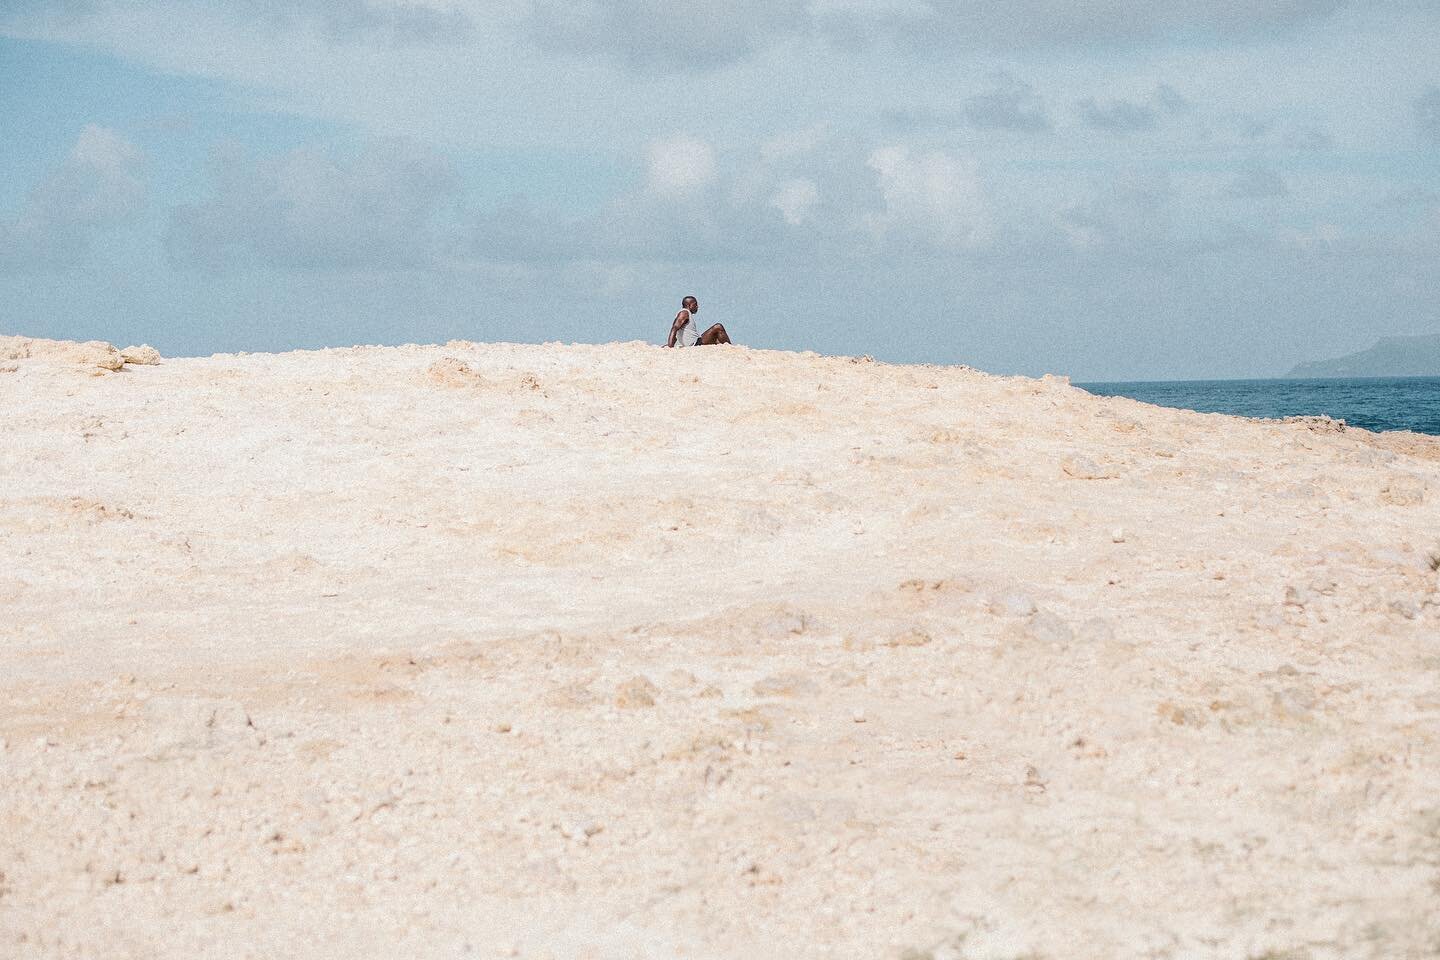 We went to the easternmost tip of Grande-Terre island, Guadeloupe and was met by this view. A man sitting alone at the top of a cliff looking towards the sea. It was such a beautiful moment, I thought, he was just sitting there so quiet, lost in his 